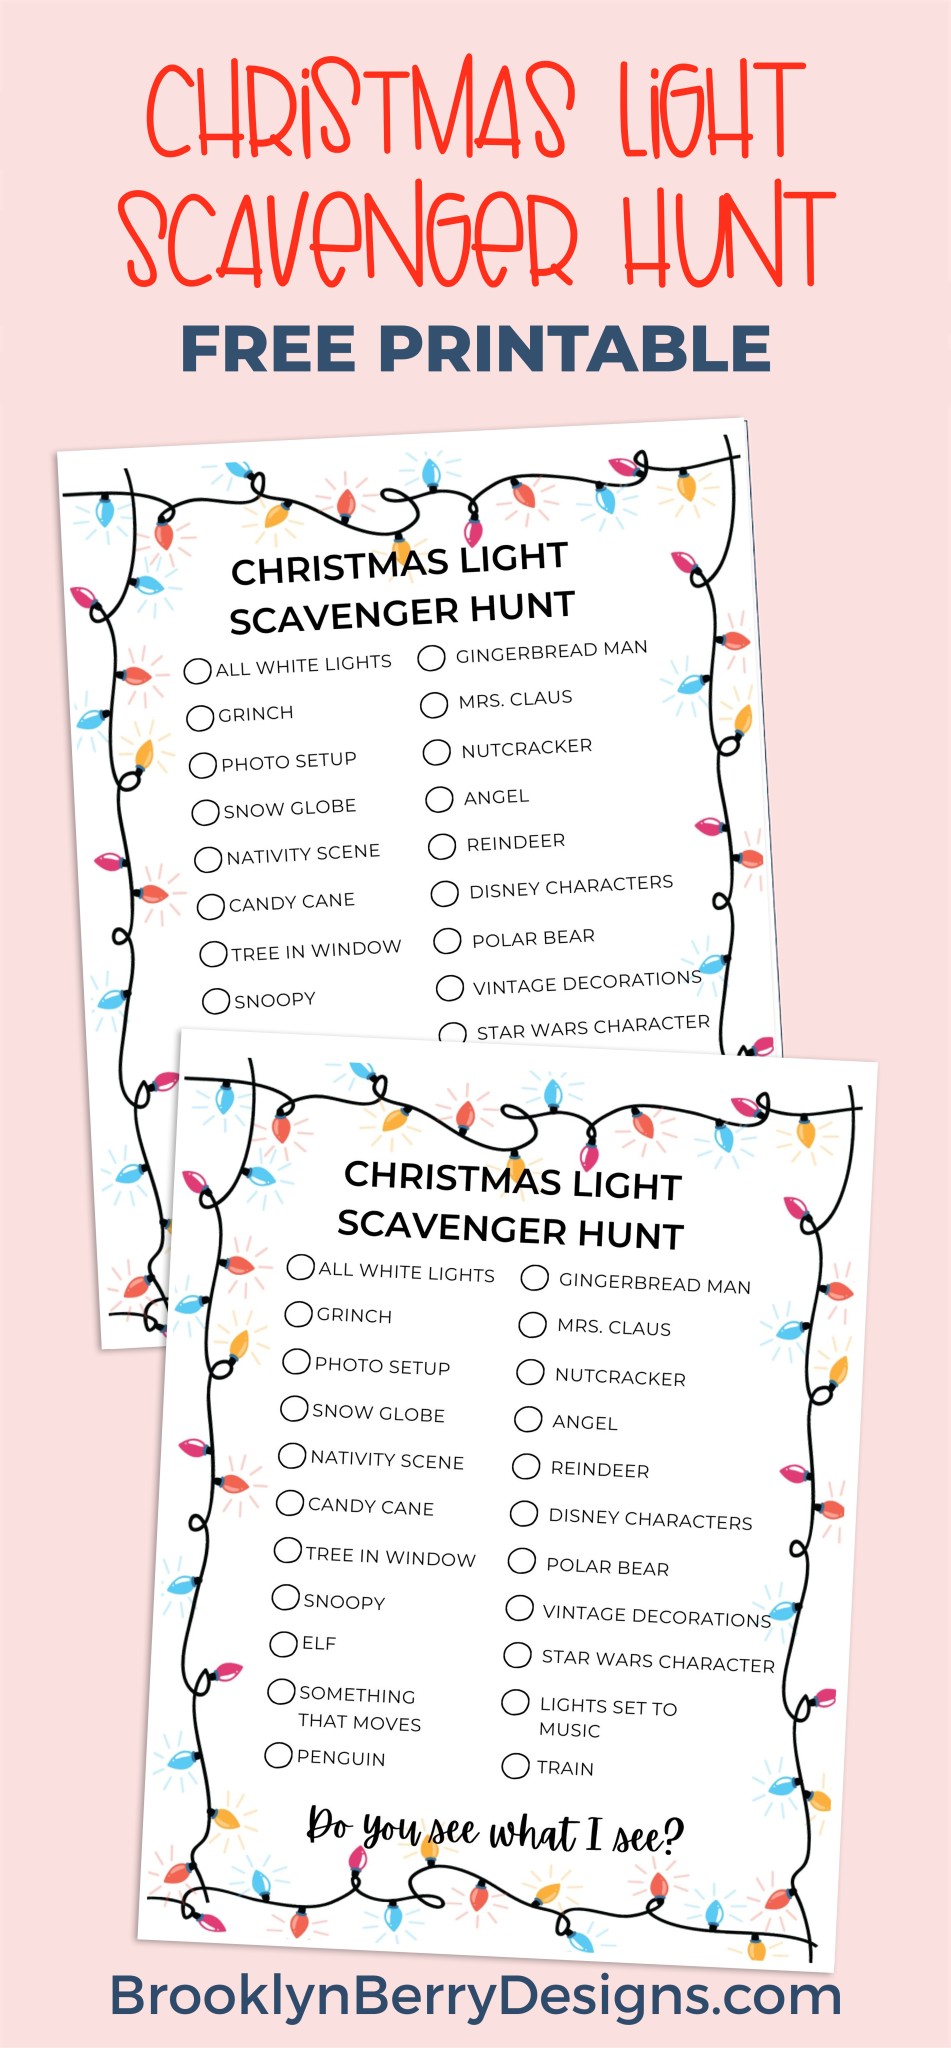 Keep your family entertained over the holidays even if you are on coronavirus lock down with this Christmas Light Scavenger Hunt. via @brookeberry